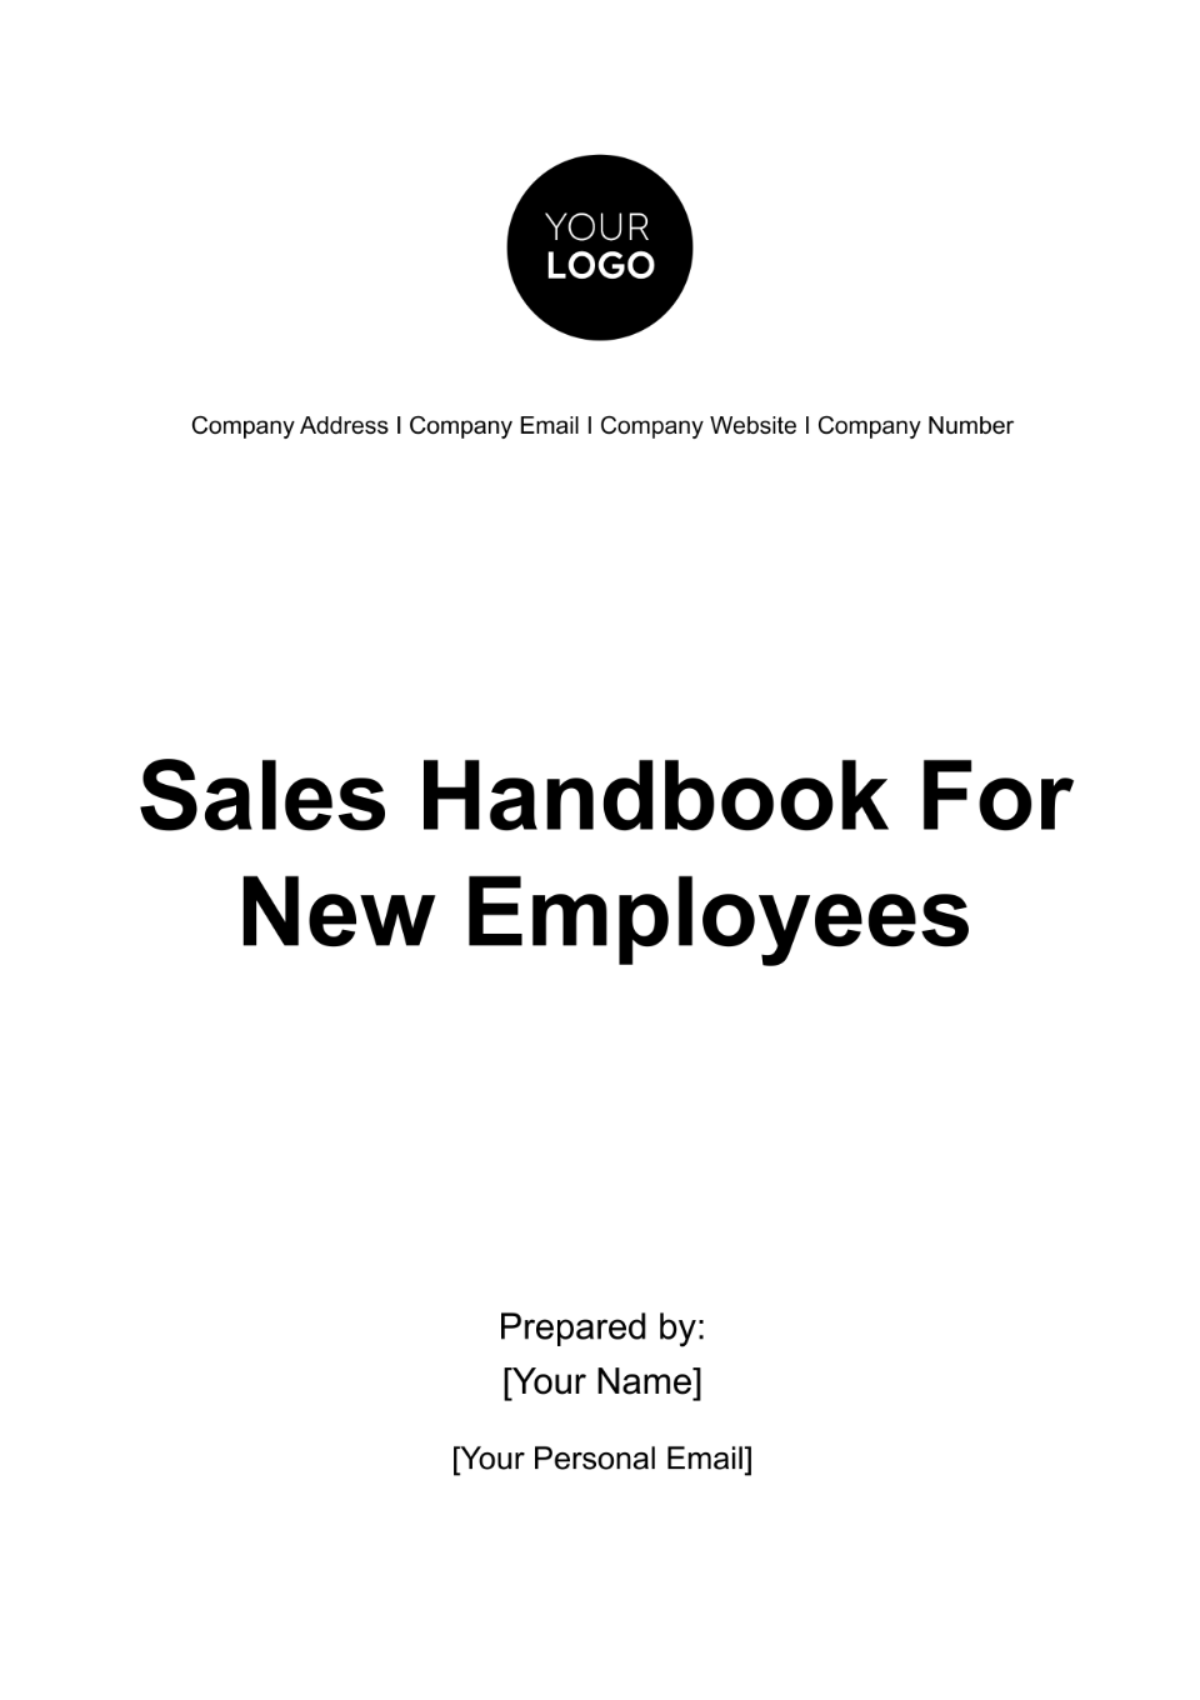 Sales Handbook for New Employees Template